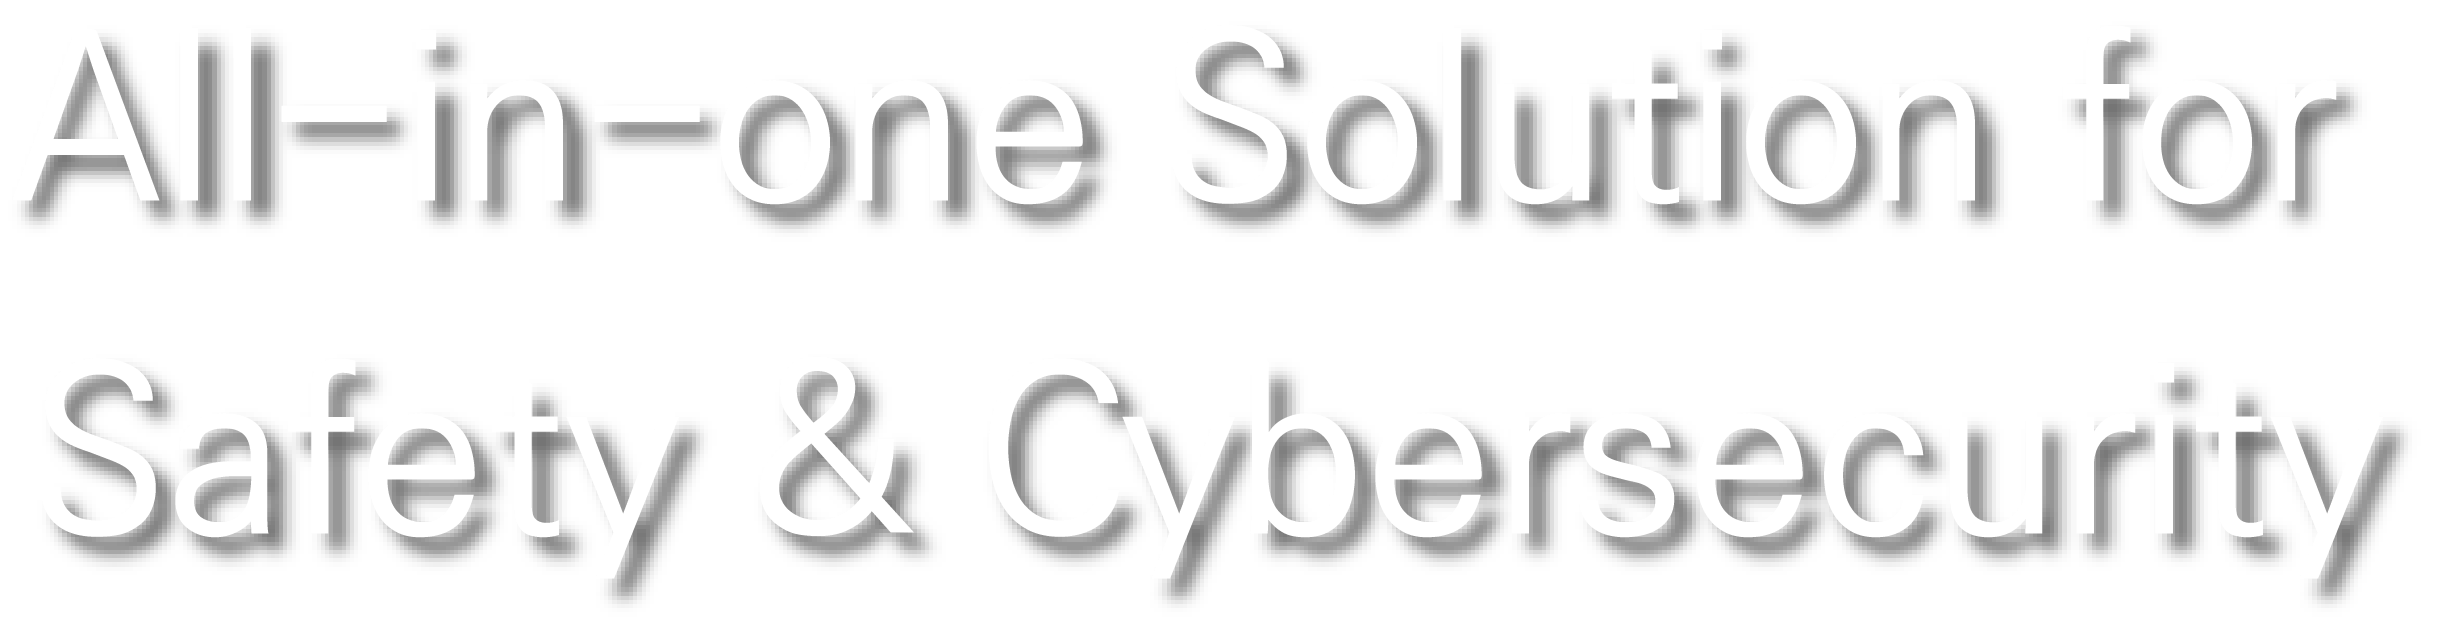 All-in-One Soultion for Safety & Cybersecurity